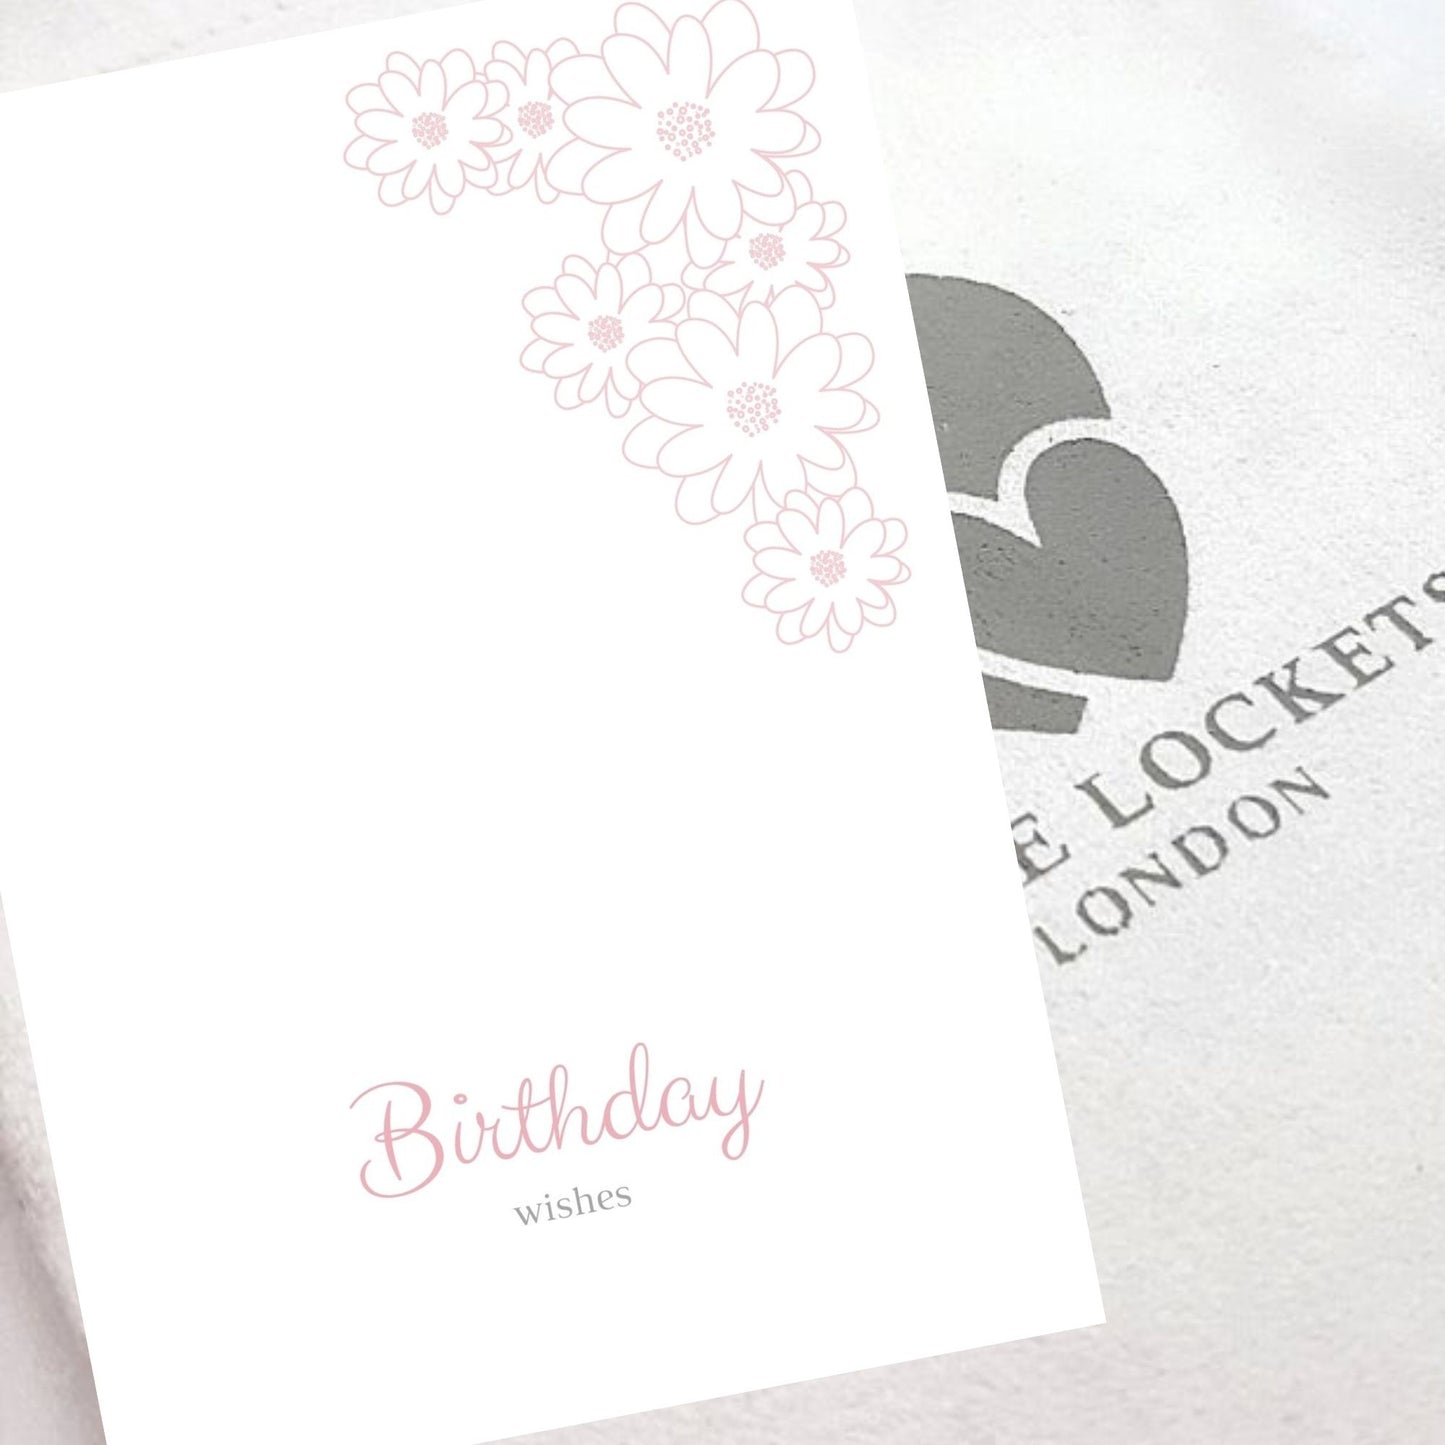 Gift Card "Birthday Wishes" shown with luxury gift pouch